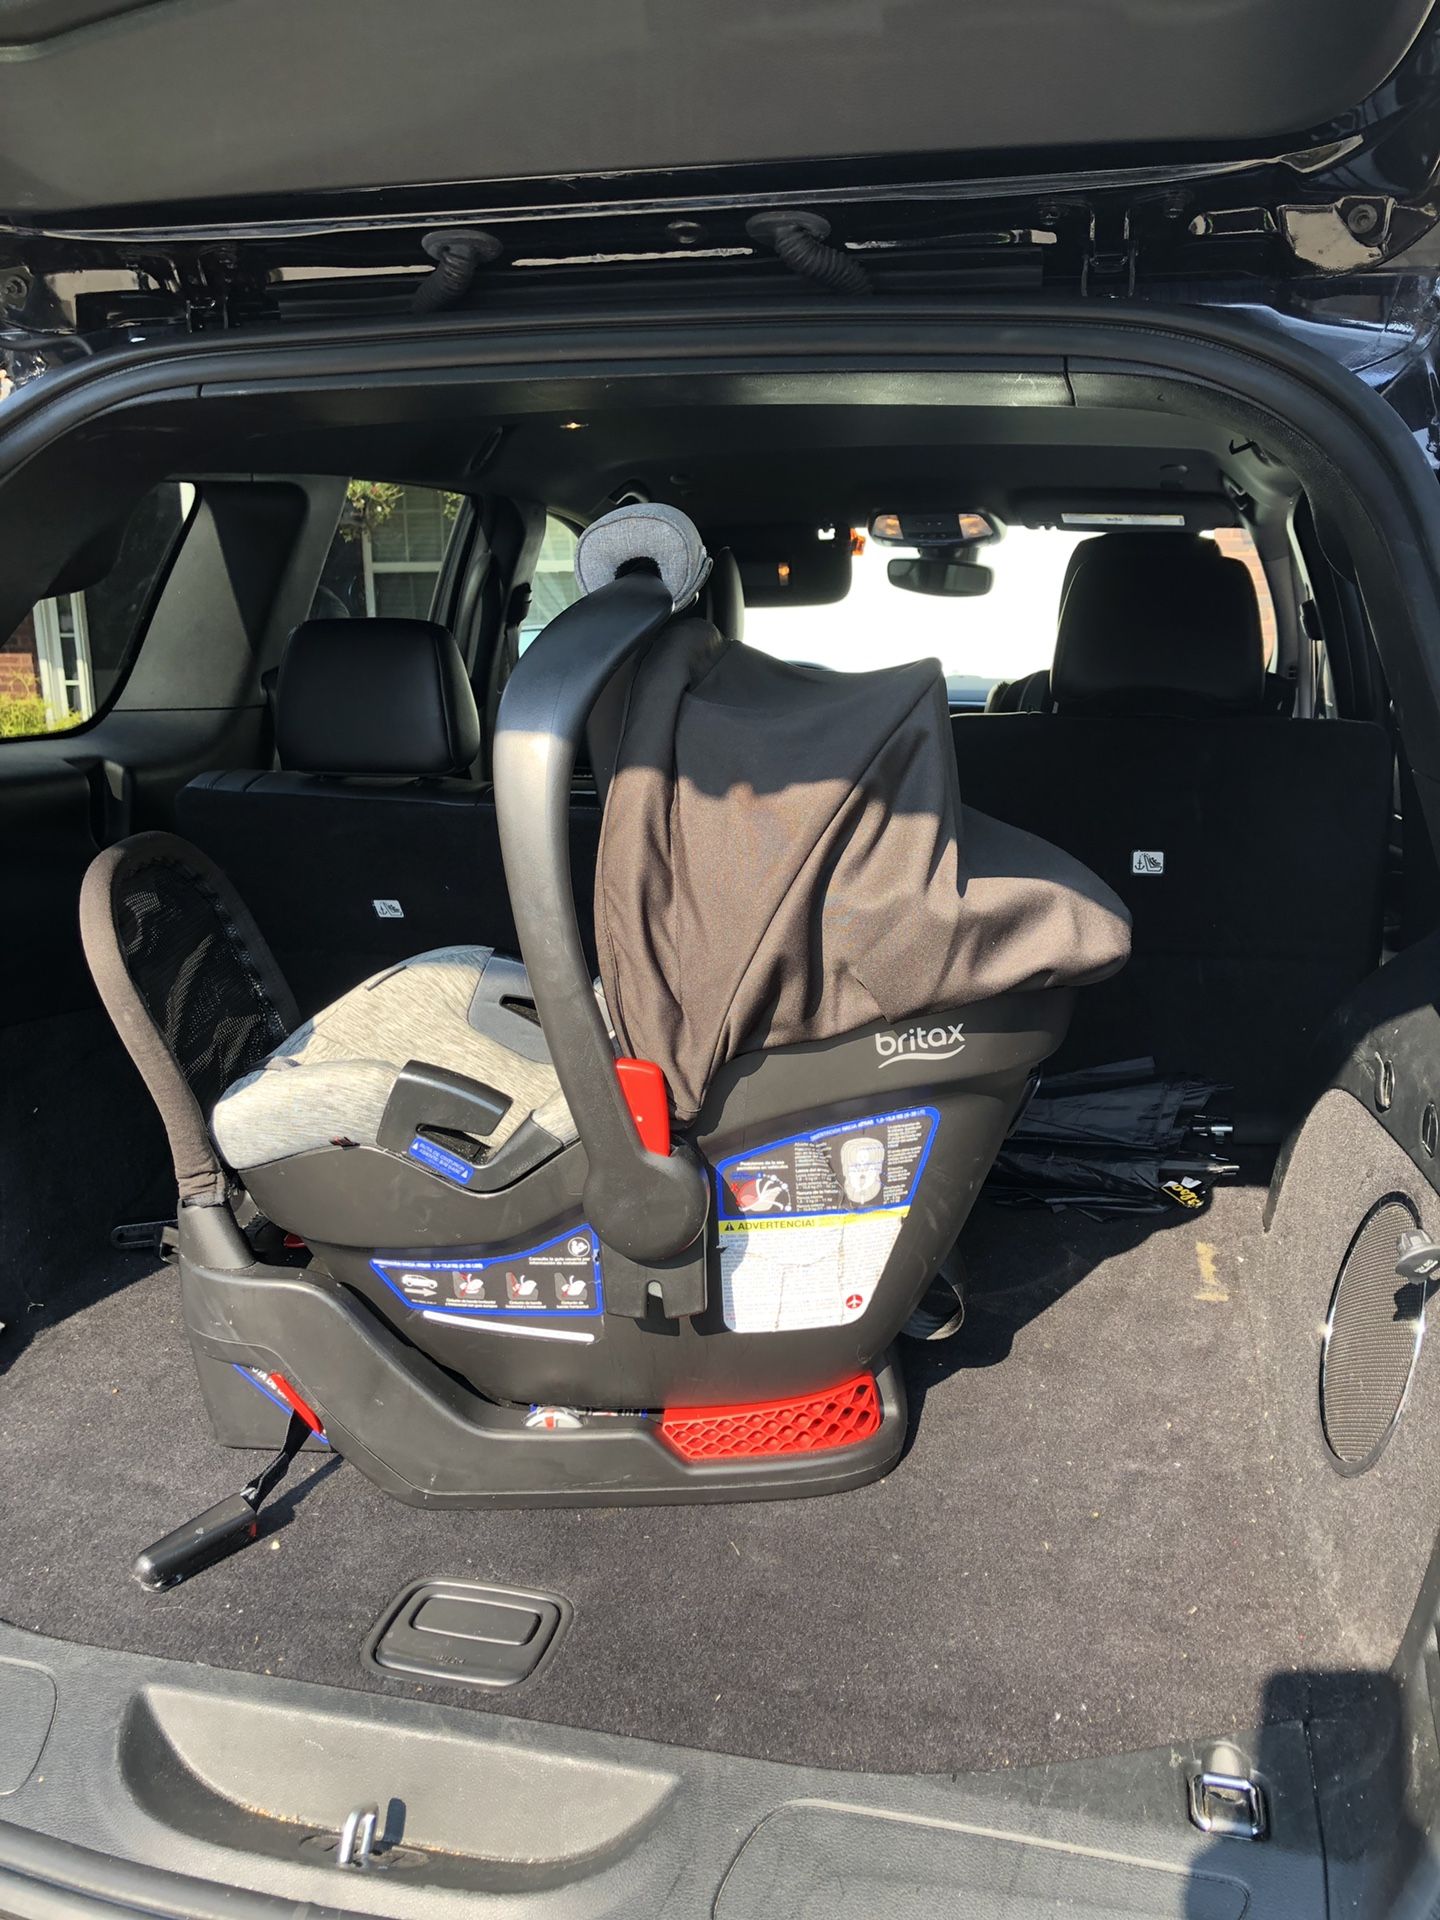 Britax Endeavors Infant Car Seat with 2 Bases